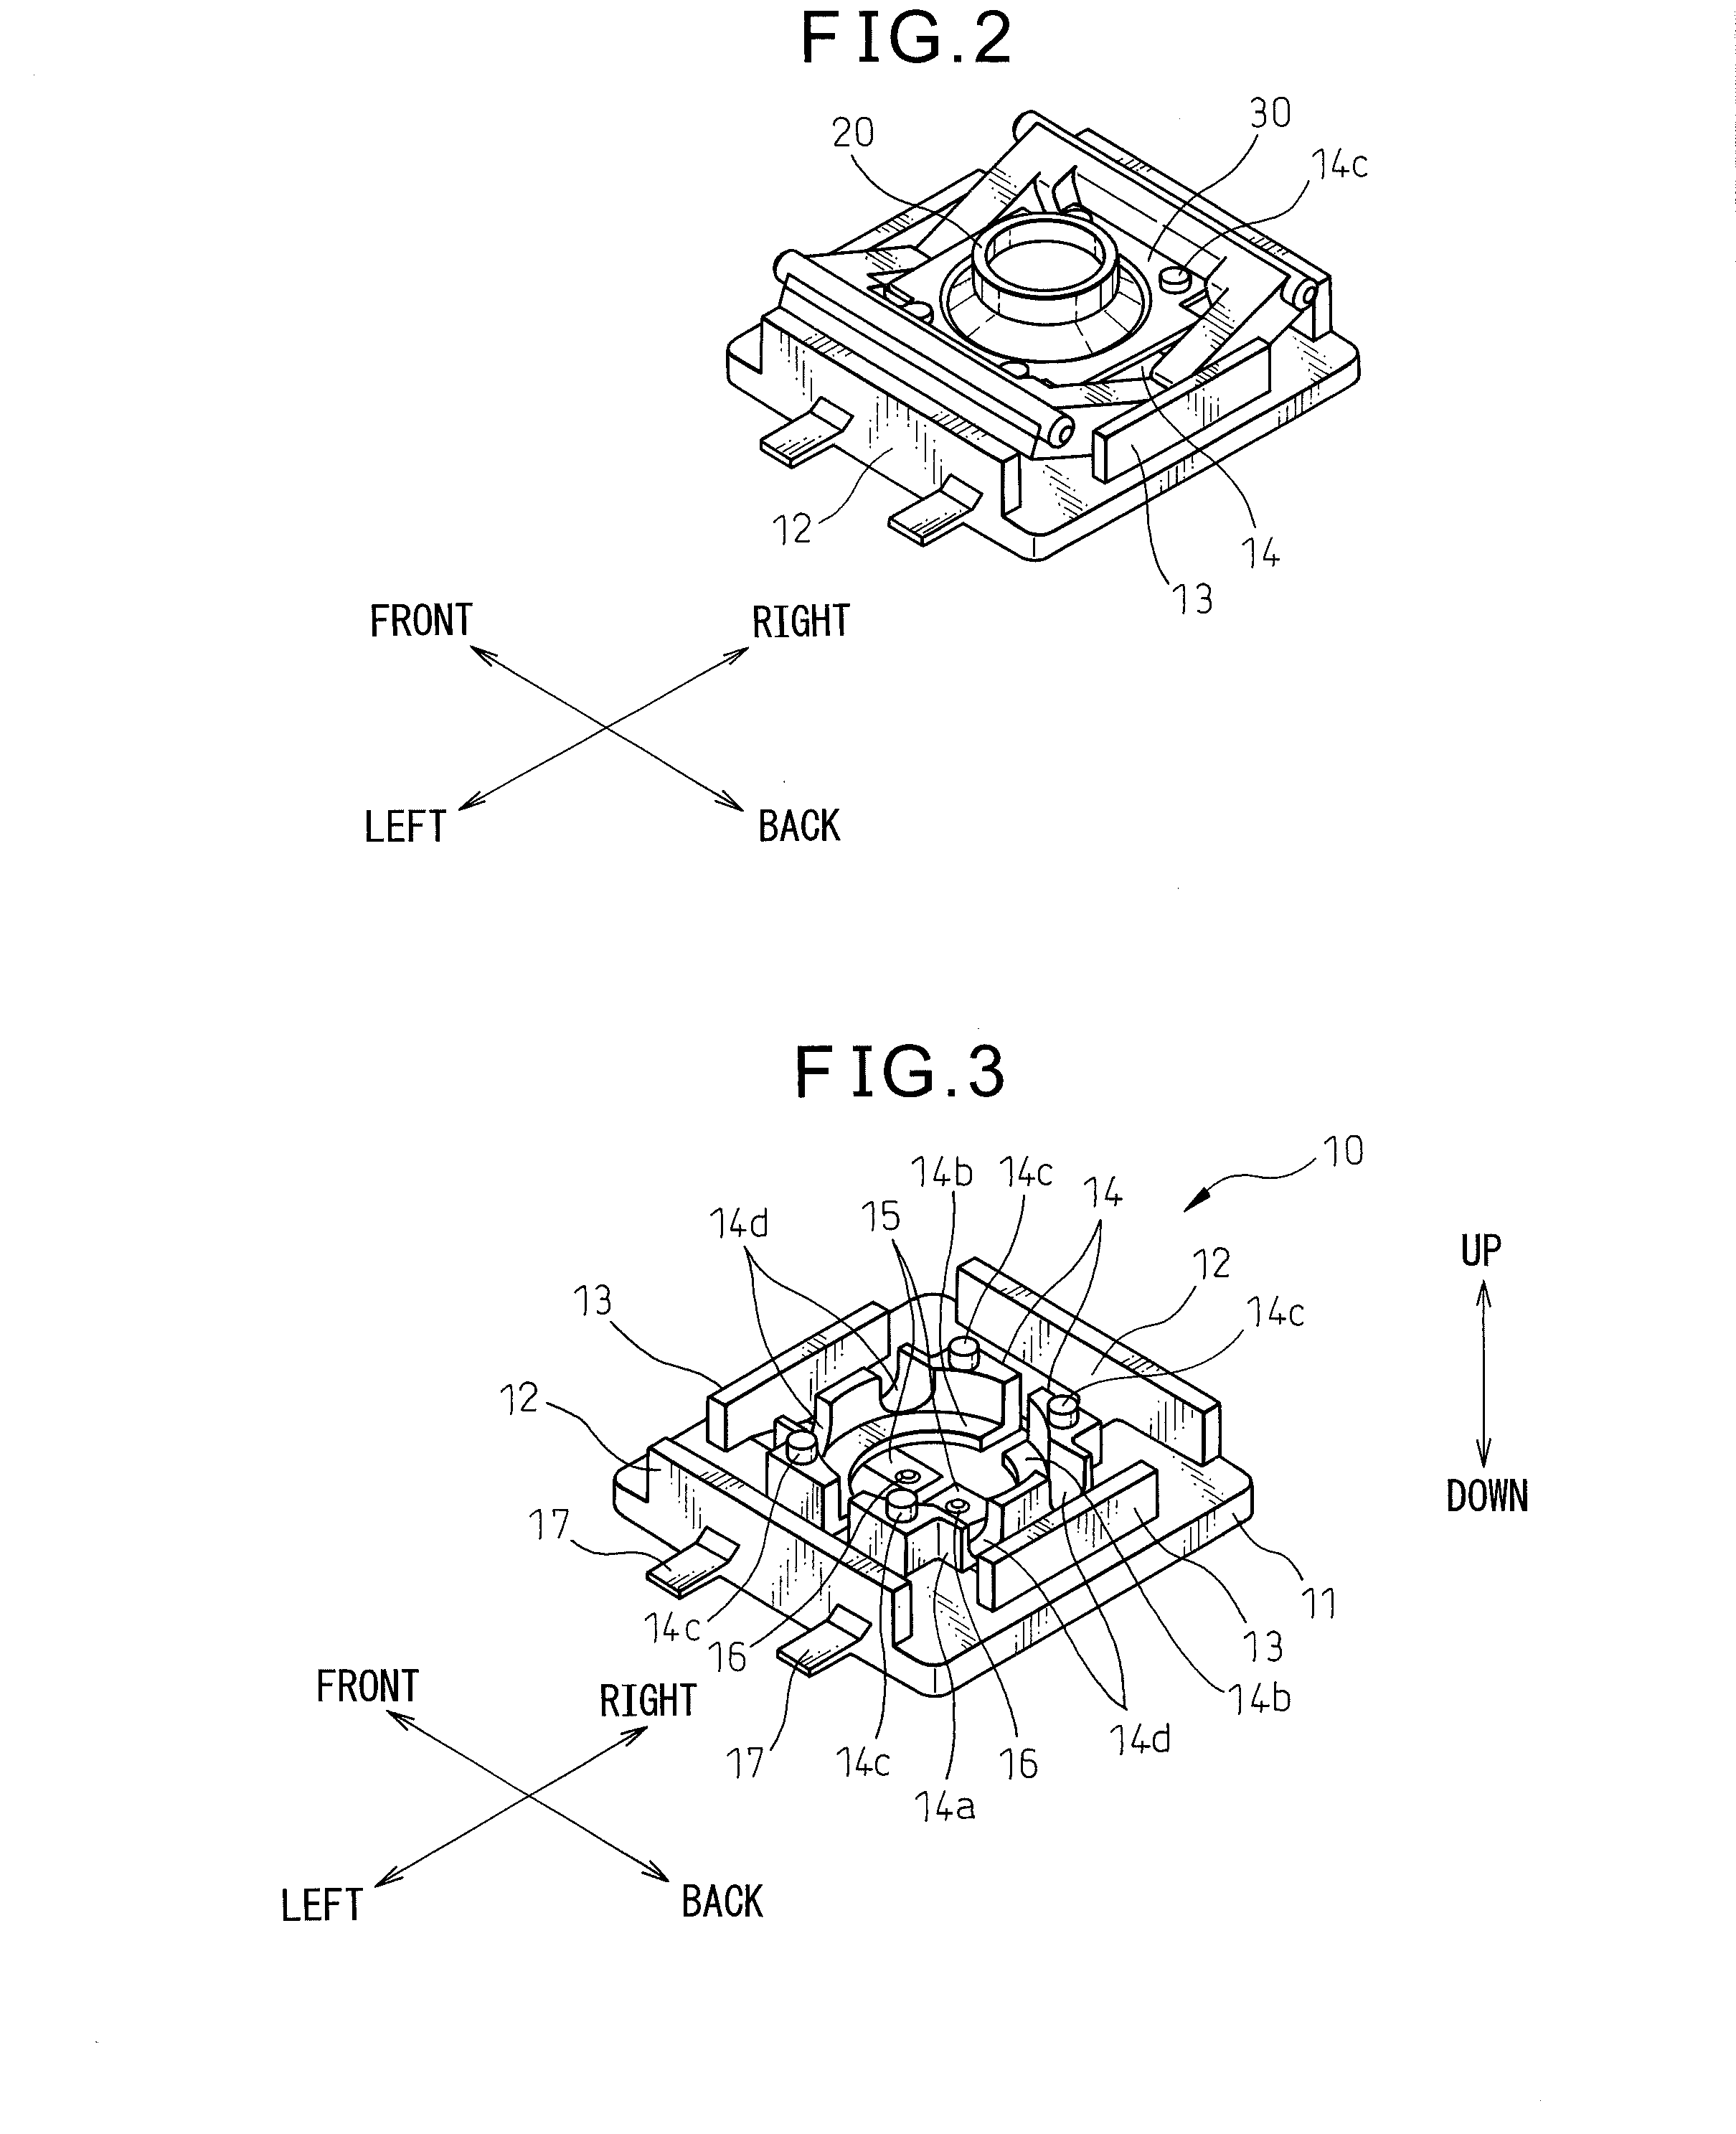 Push button-type switch device